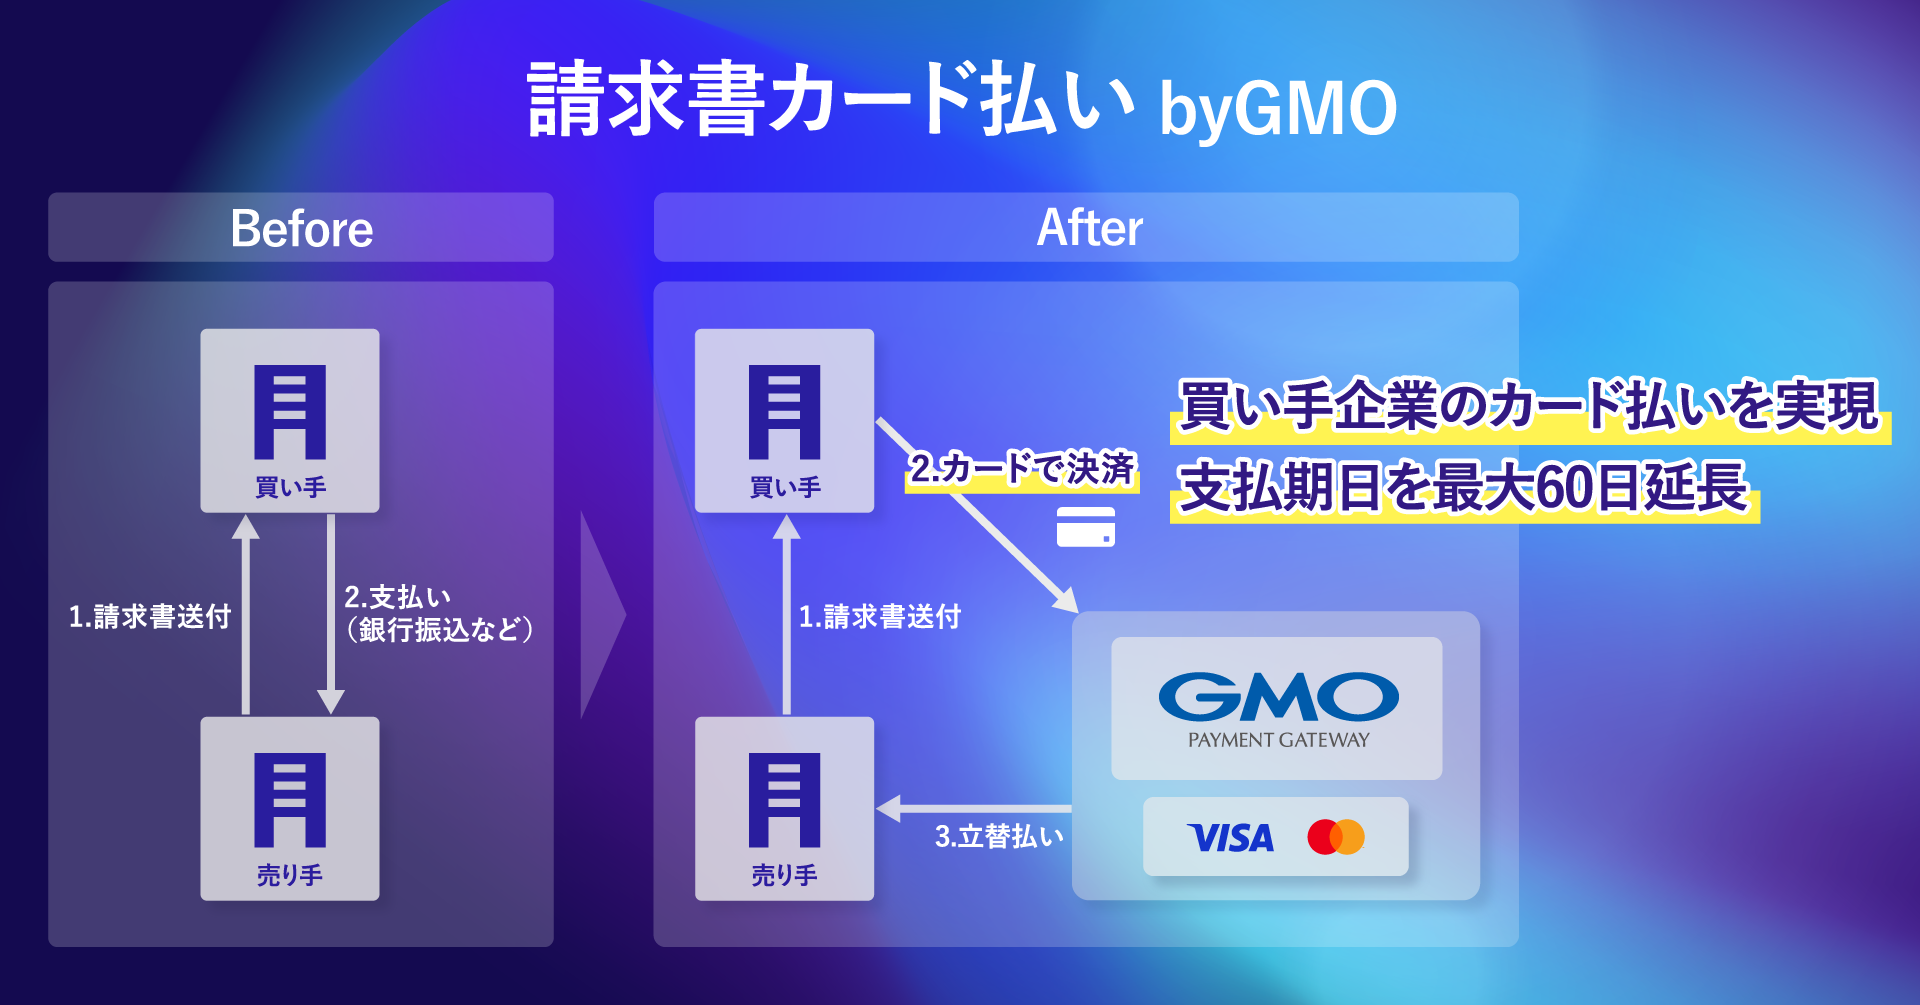 Providing "Invoice Card Pay byGMO" that realizes card payment for BtoB transactions